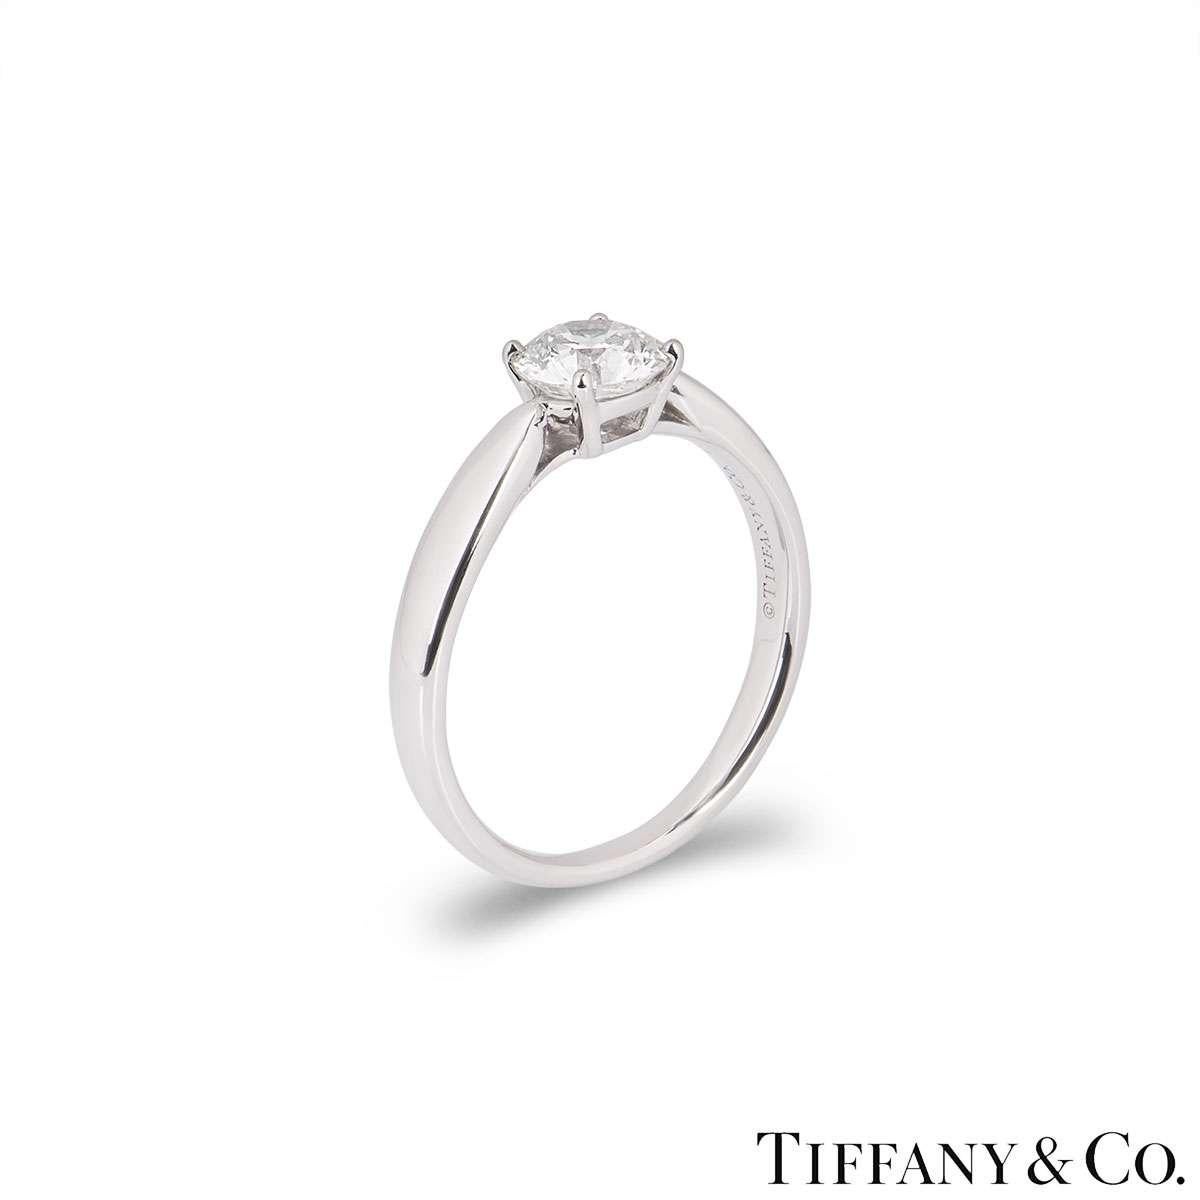 A stunning platinum diamond ring by Tiffany & Co. from the Harmony collection. The ring comprises of a round brilliant cut diamond in a 4 claw setting with a weight of 0.72ct, I colour and VS1 clarity. The diamond scores an excellent rating in all